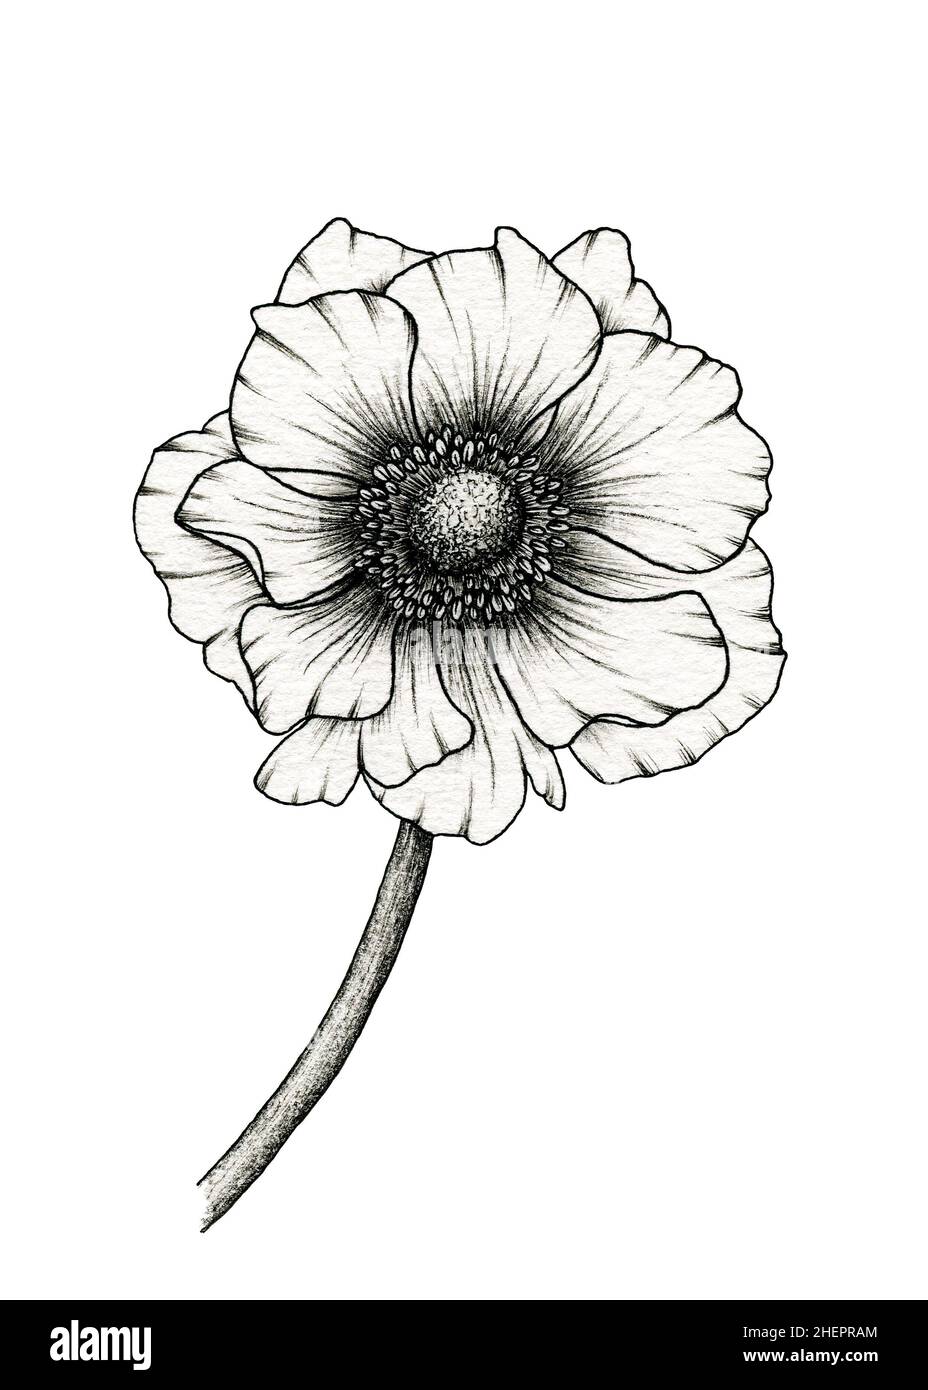 Monochrome anemone flower drawing isolated on white, floral ink line ...